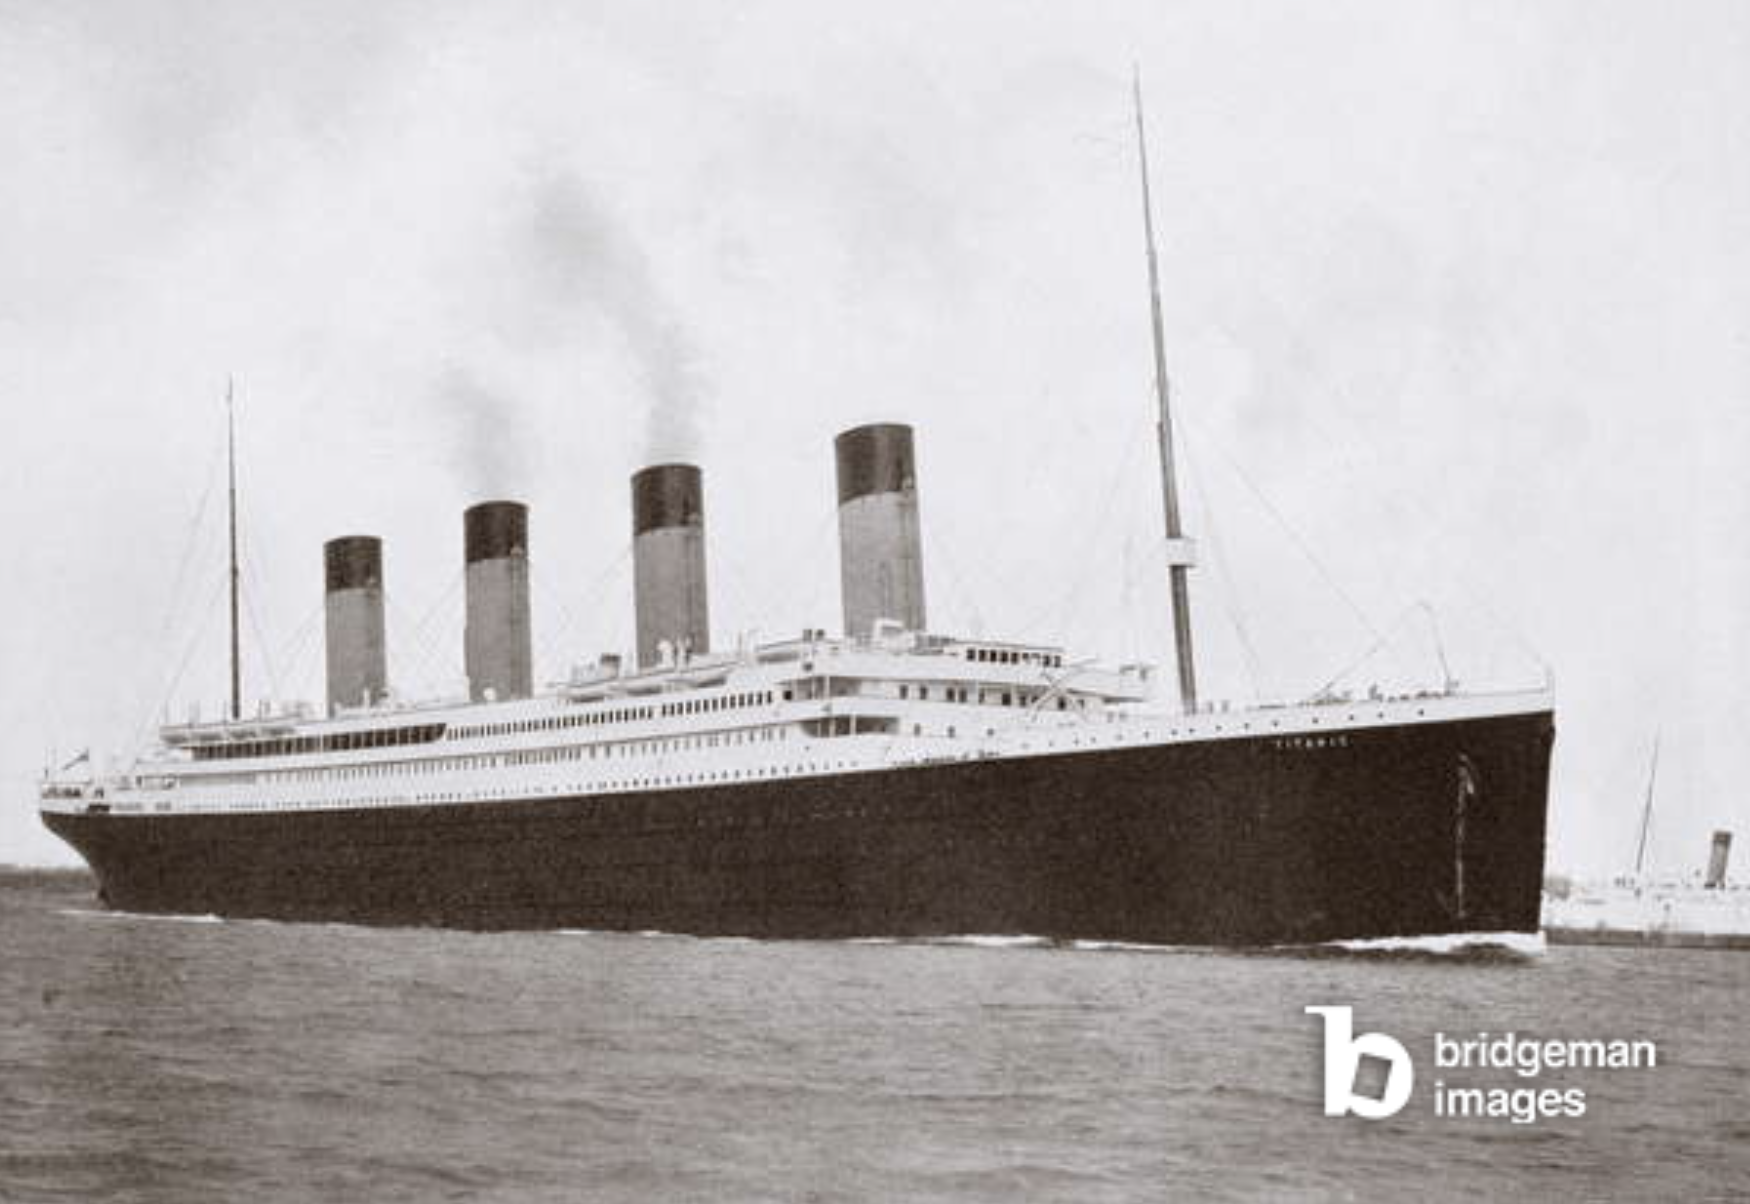 RMS Titanic of the White Star Line (litho), English Photographer, (20th century) / Private Collection / Bridgeman Images